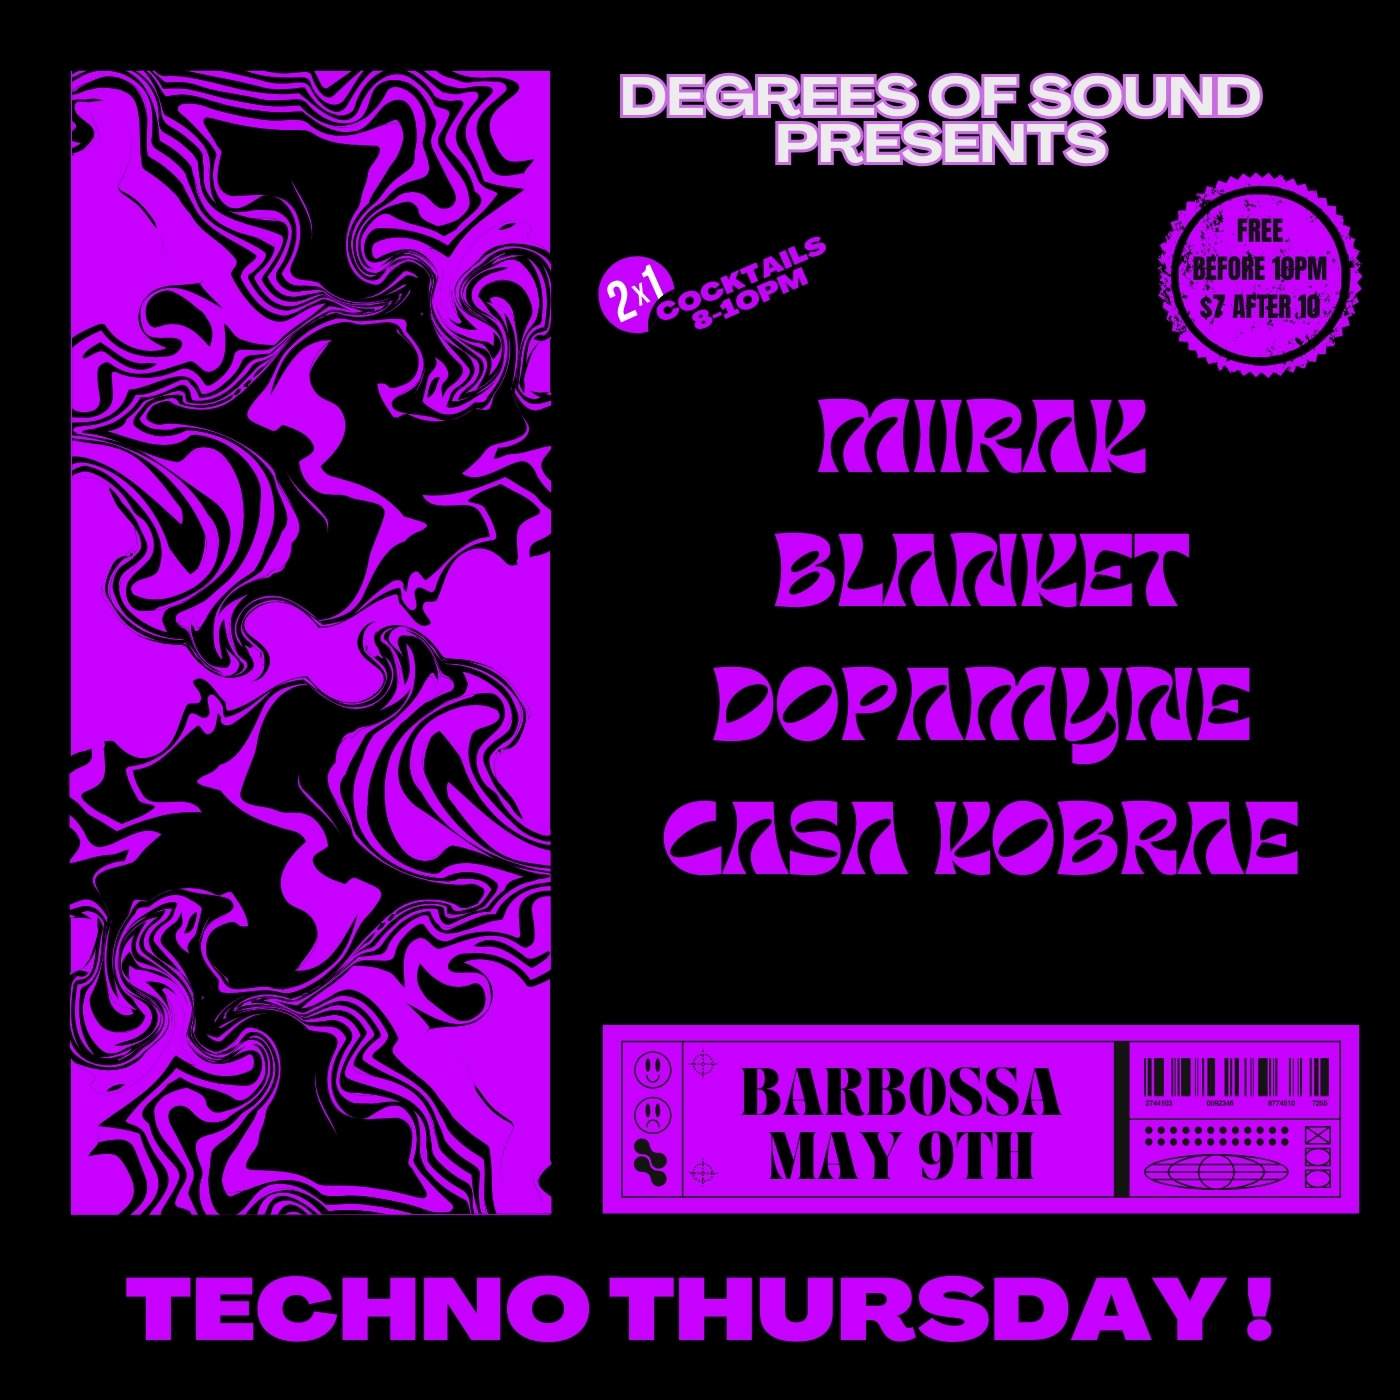 TECHNO THURSDAY BY DEGREES OF SOUND - Página frontal